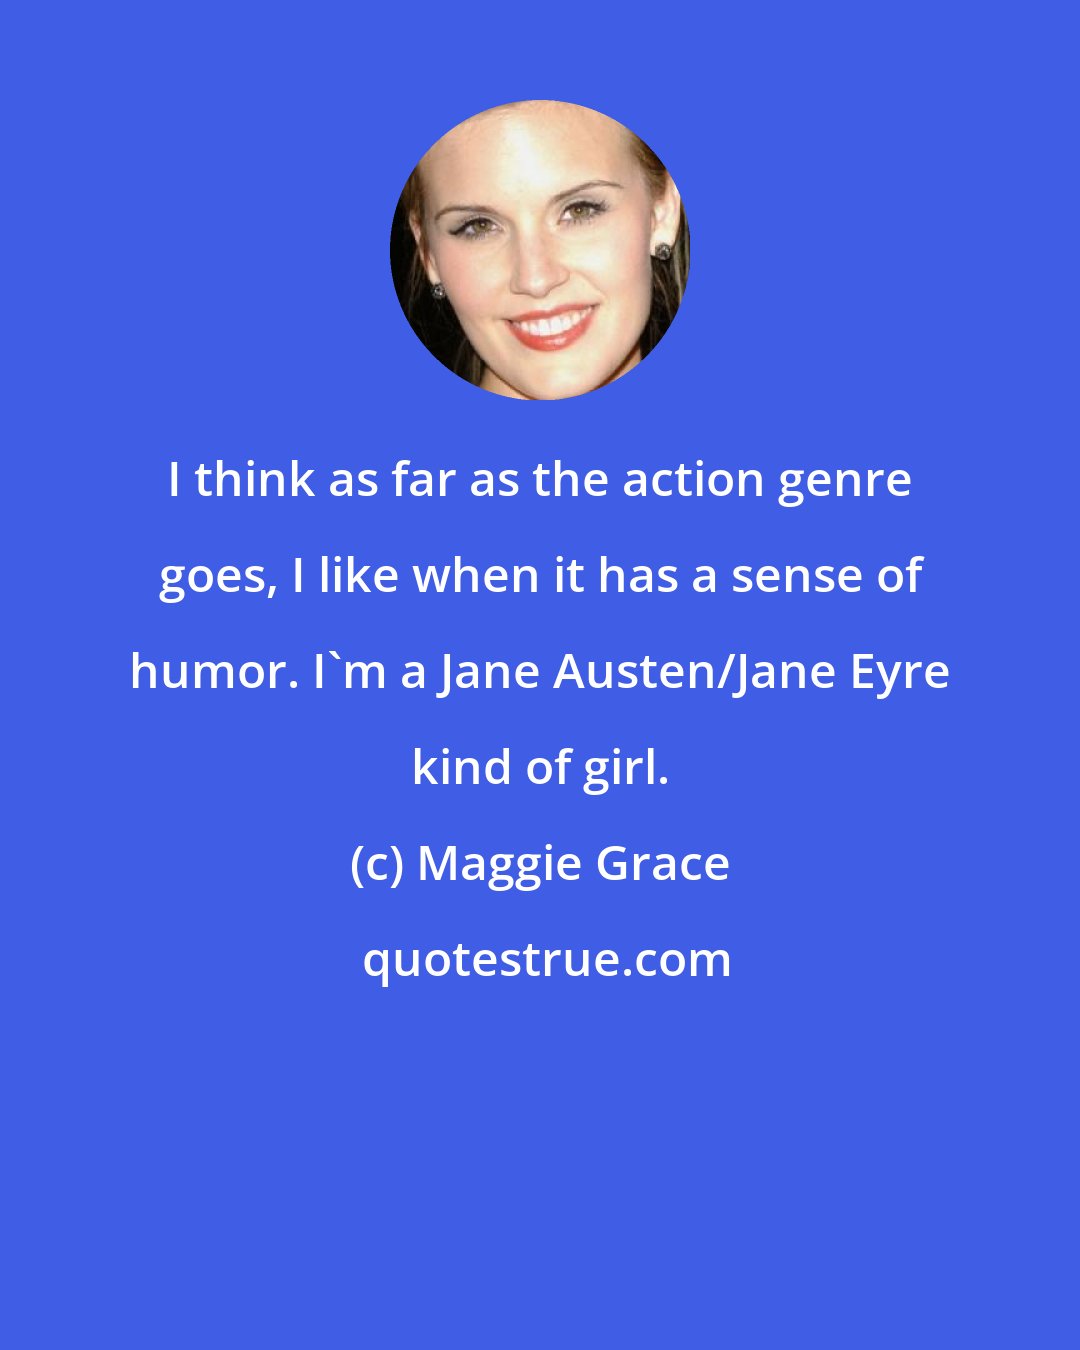 Maggie Grace: I think as far as the action genre goes, I like when it has a sense of humor. I'm a Jane Austen/Jane Eyre kind of girl.